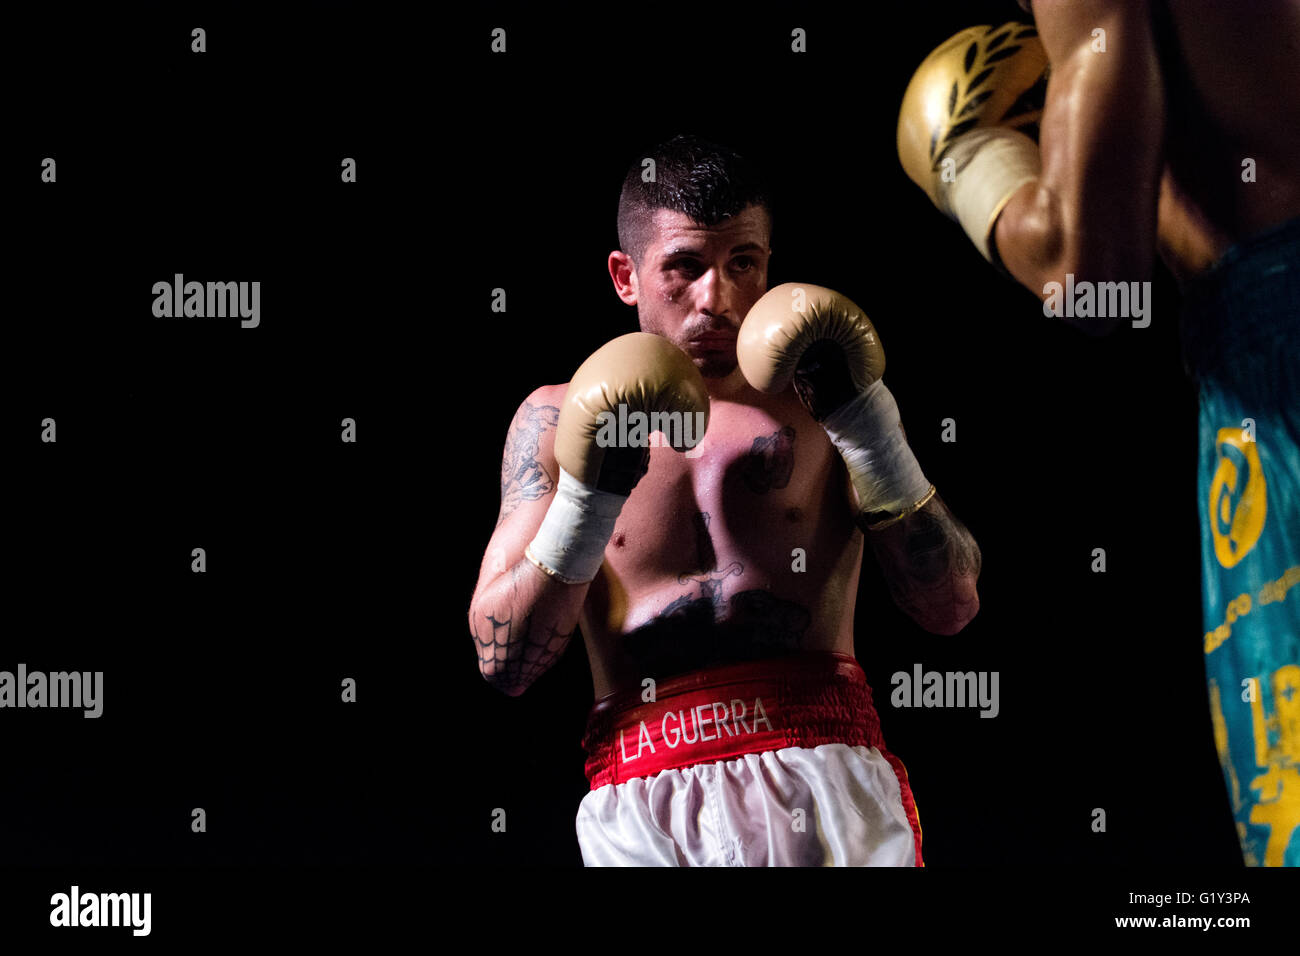 Gijon, Spain. 21st May, 2016. Marc Vidal during the boxing match against Juancho Gonzalez of Spanish national featherweight boxing championships at Sports Center on May 21, 2016 in Gijon, Spain. Credit: David Gato/Alamy Live News Stock Photo